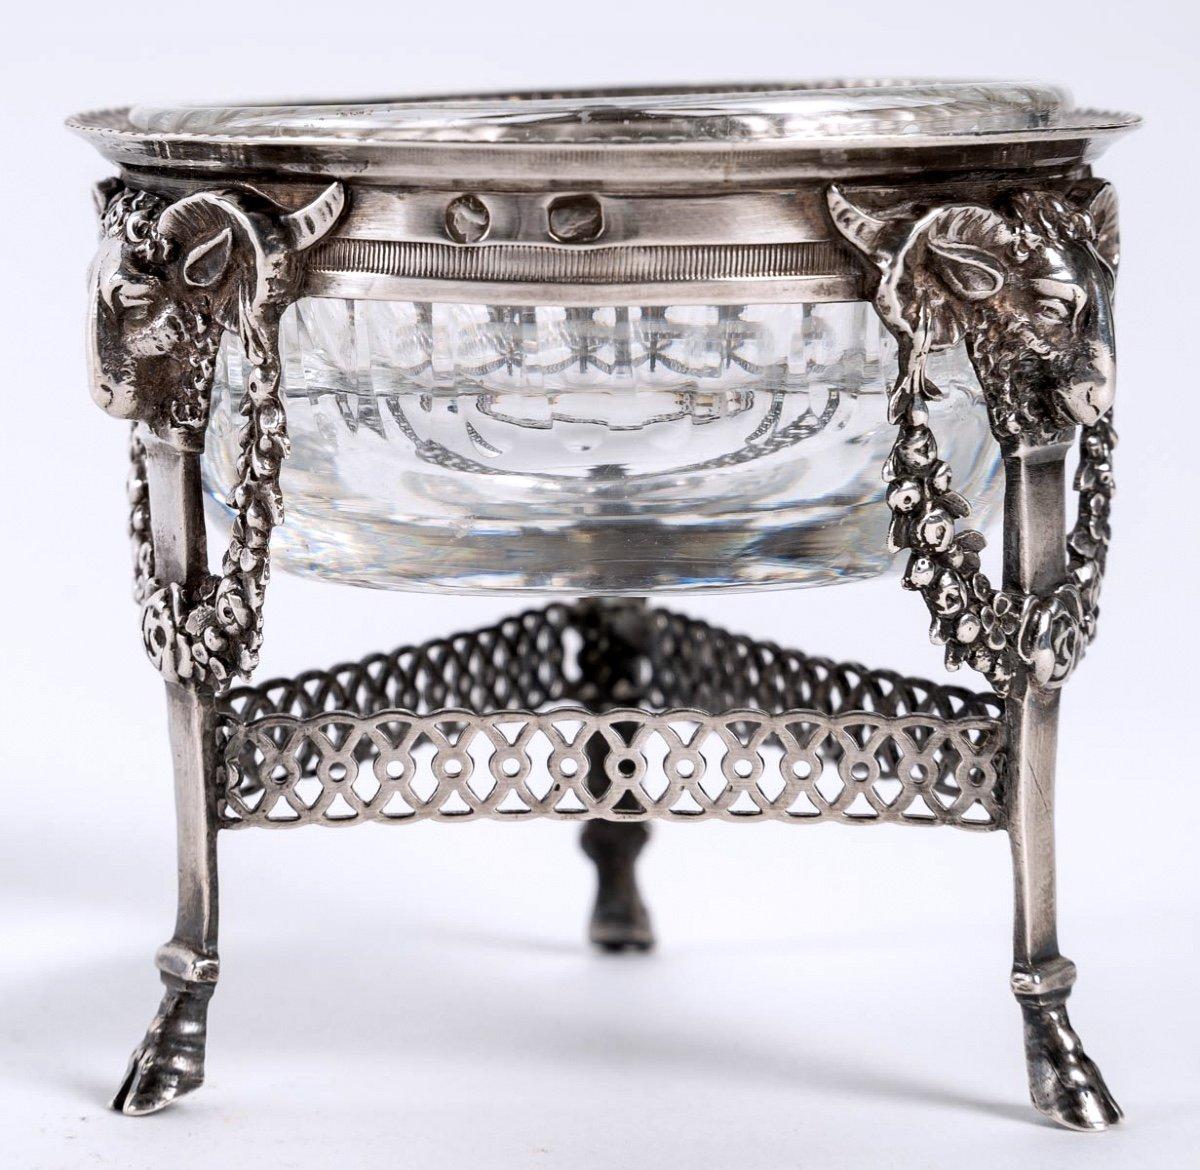 Restauration Pair of Silver and Crystal Salerons, Period : Early 19th Century, Restoration